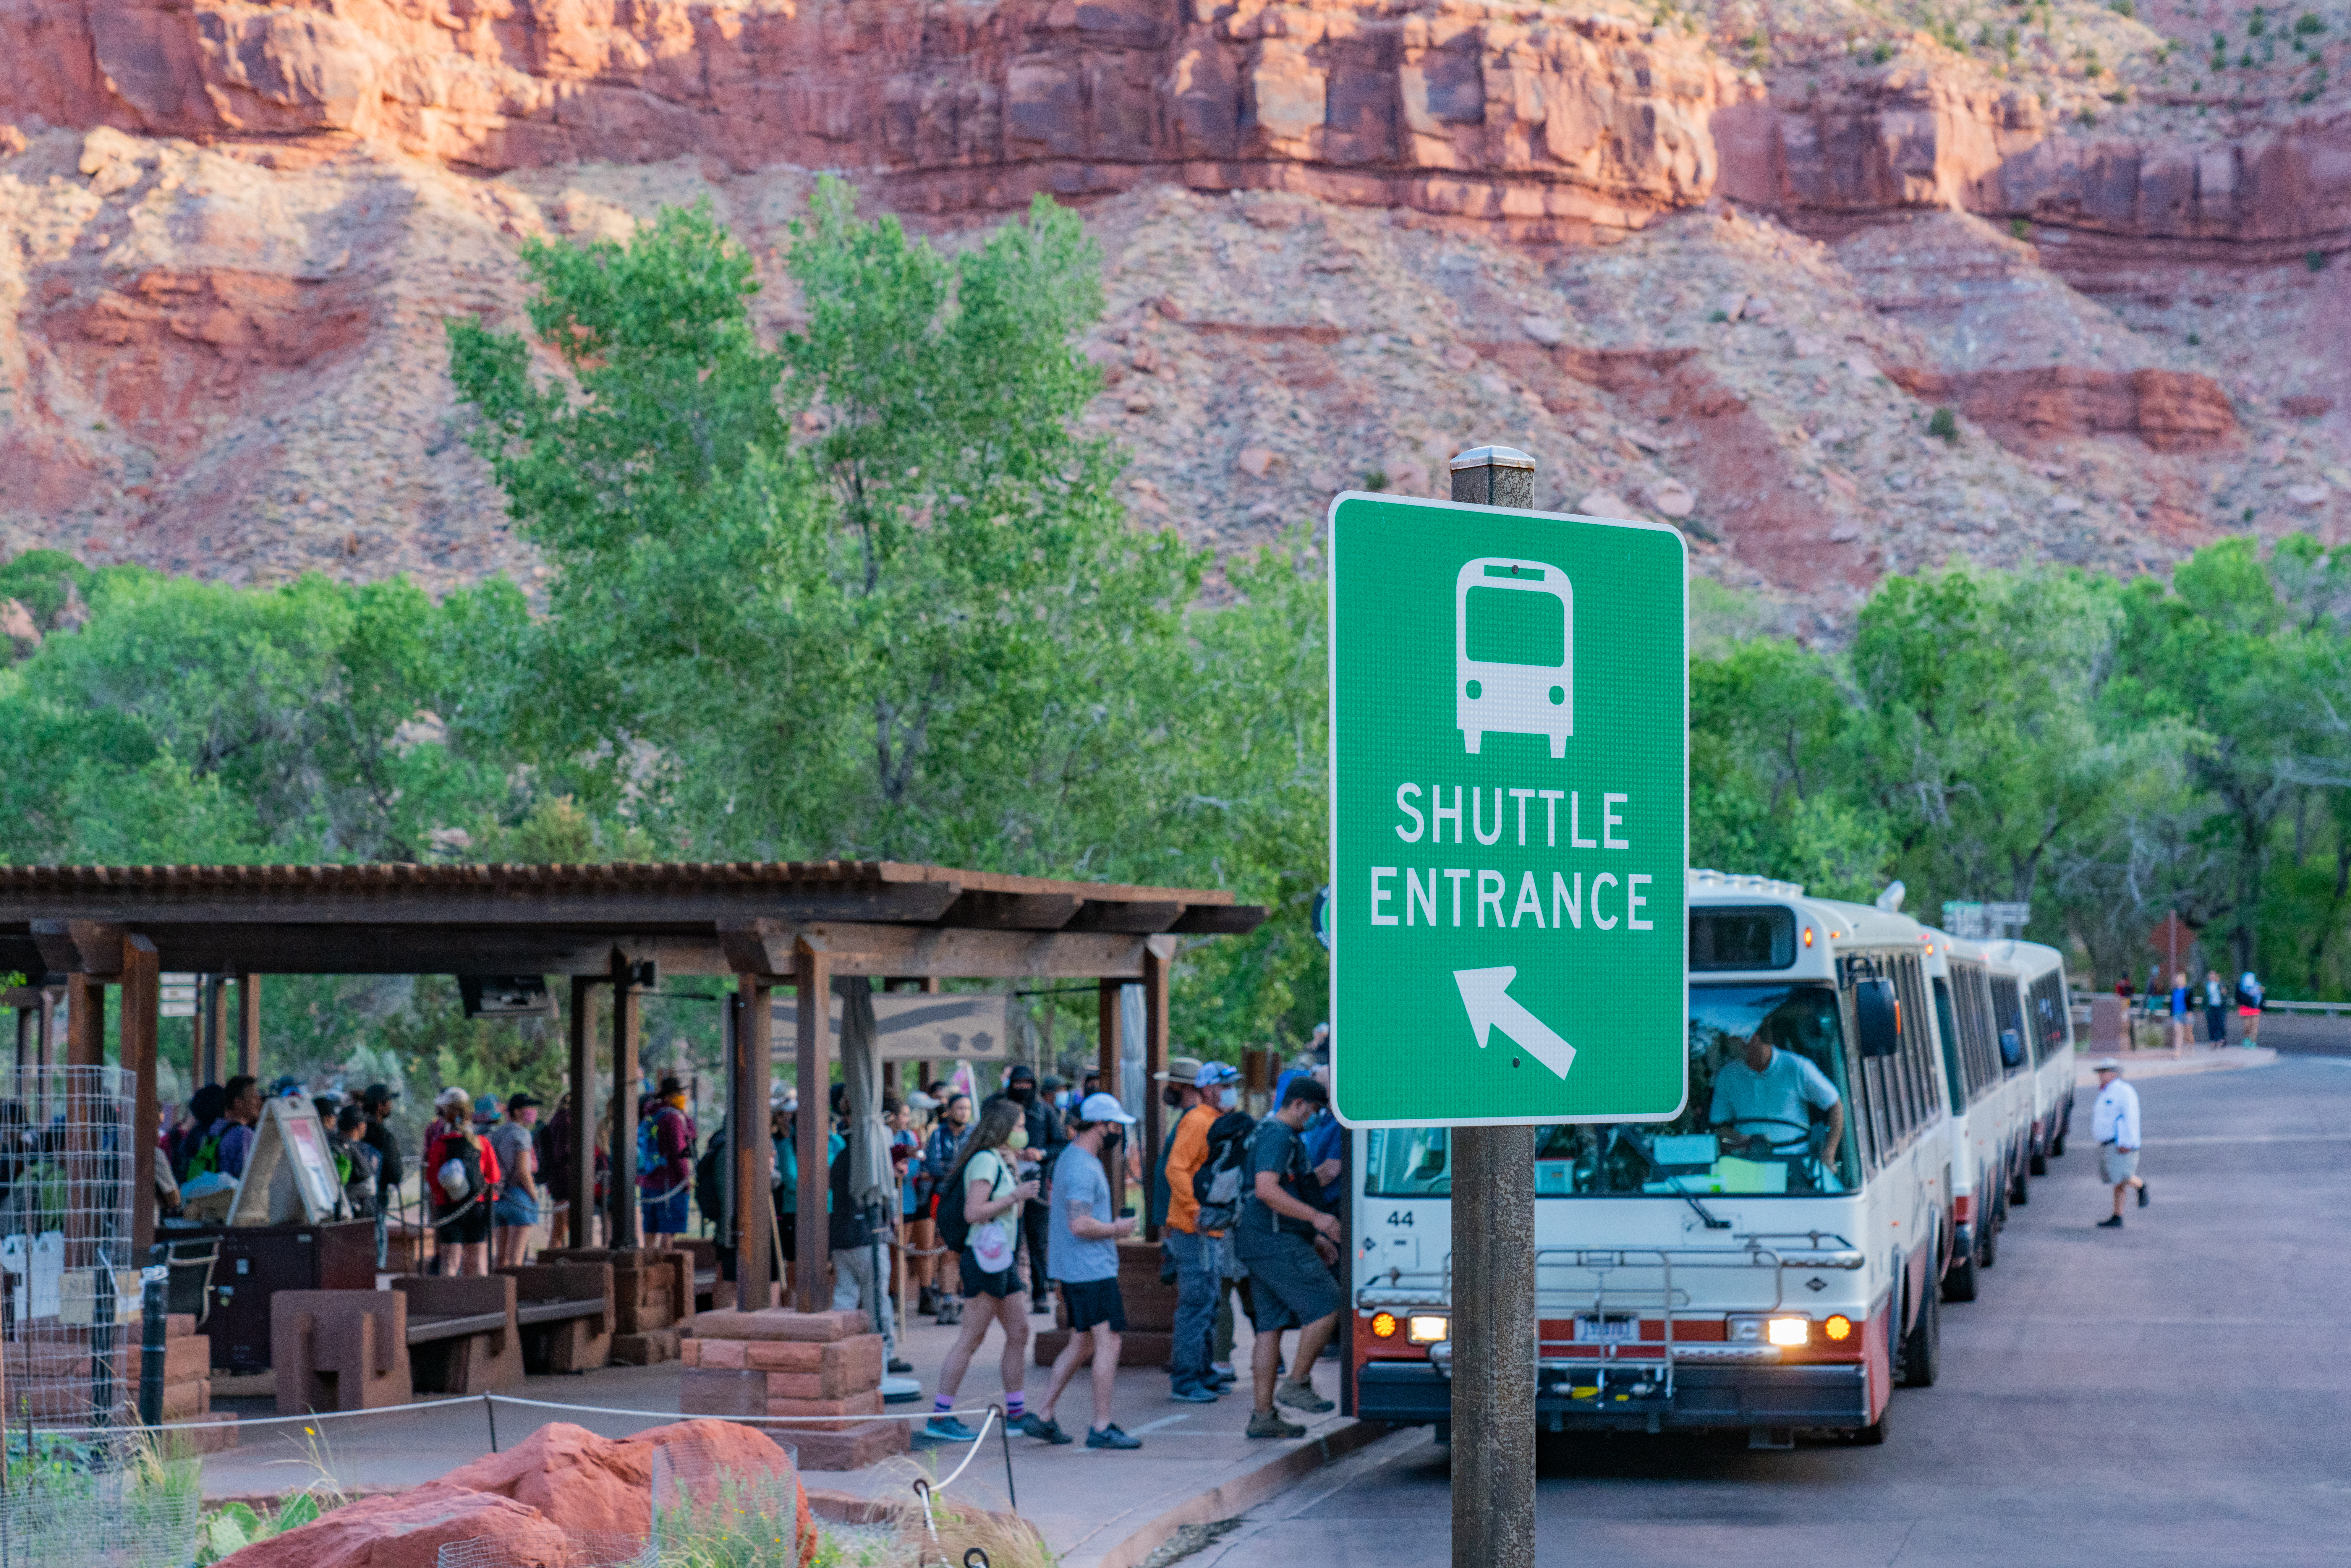 Visitors standing in line to board shuttle bus.